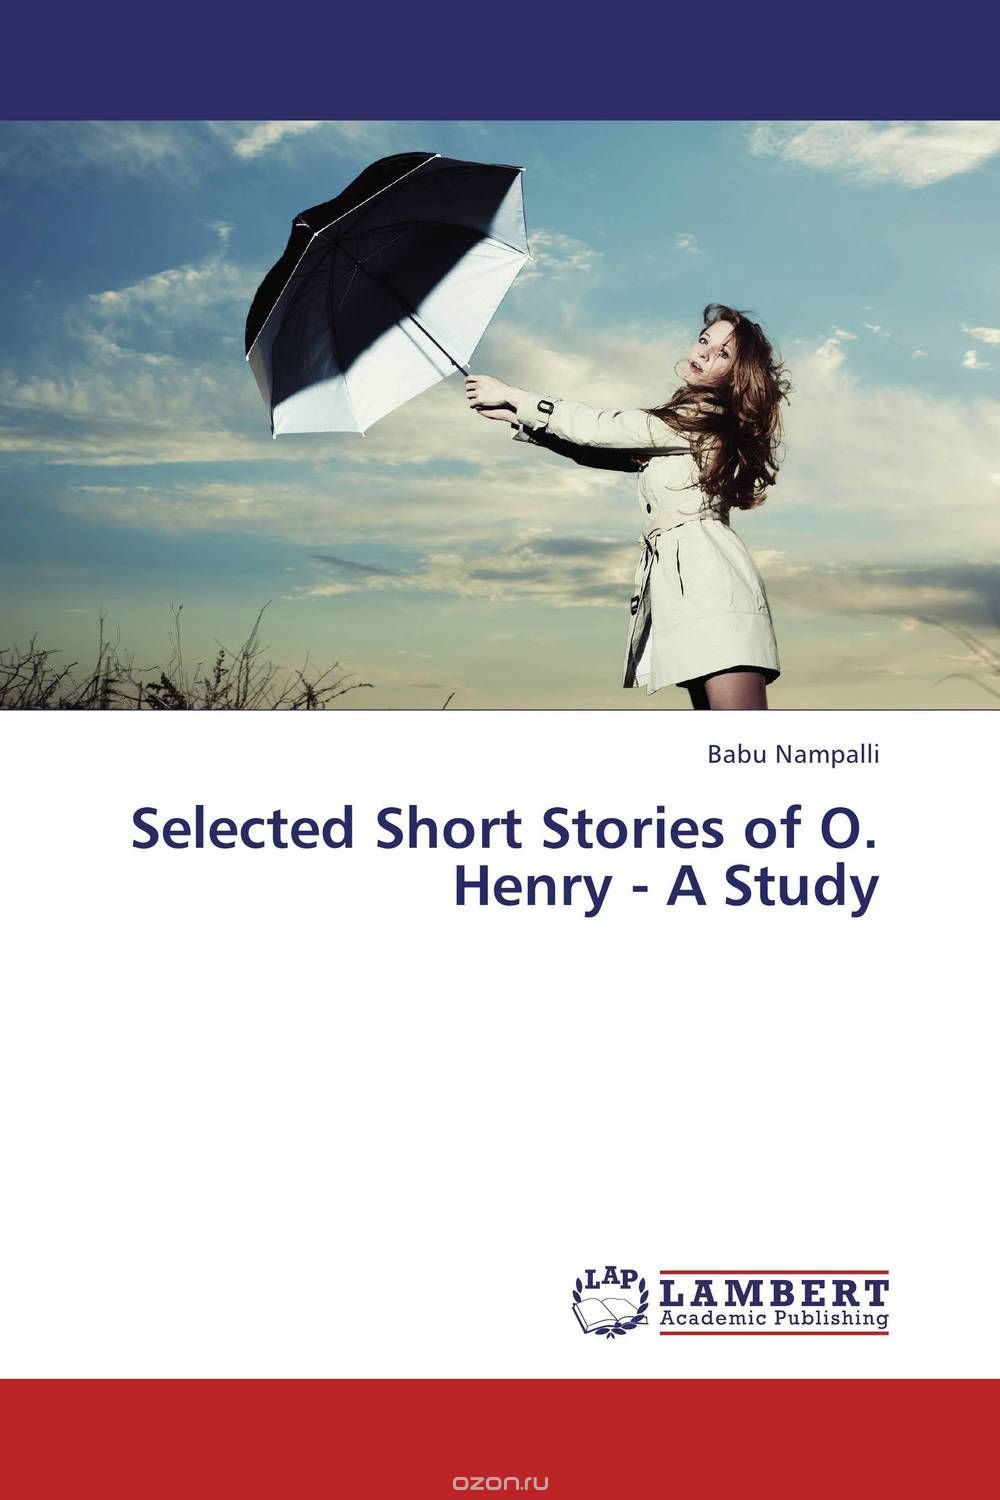 Selected Short Stories of O. Henry - A Study